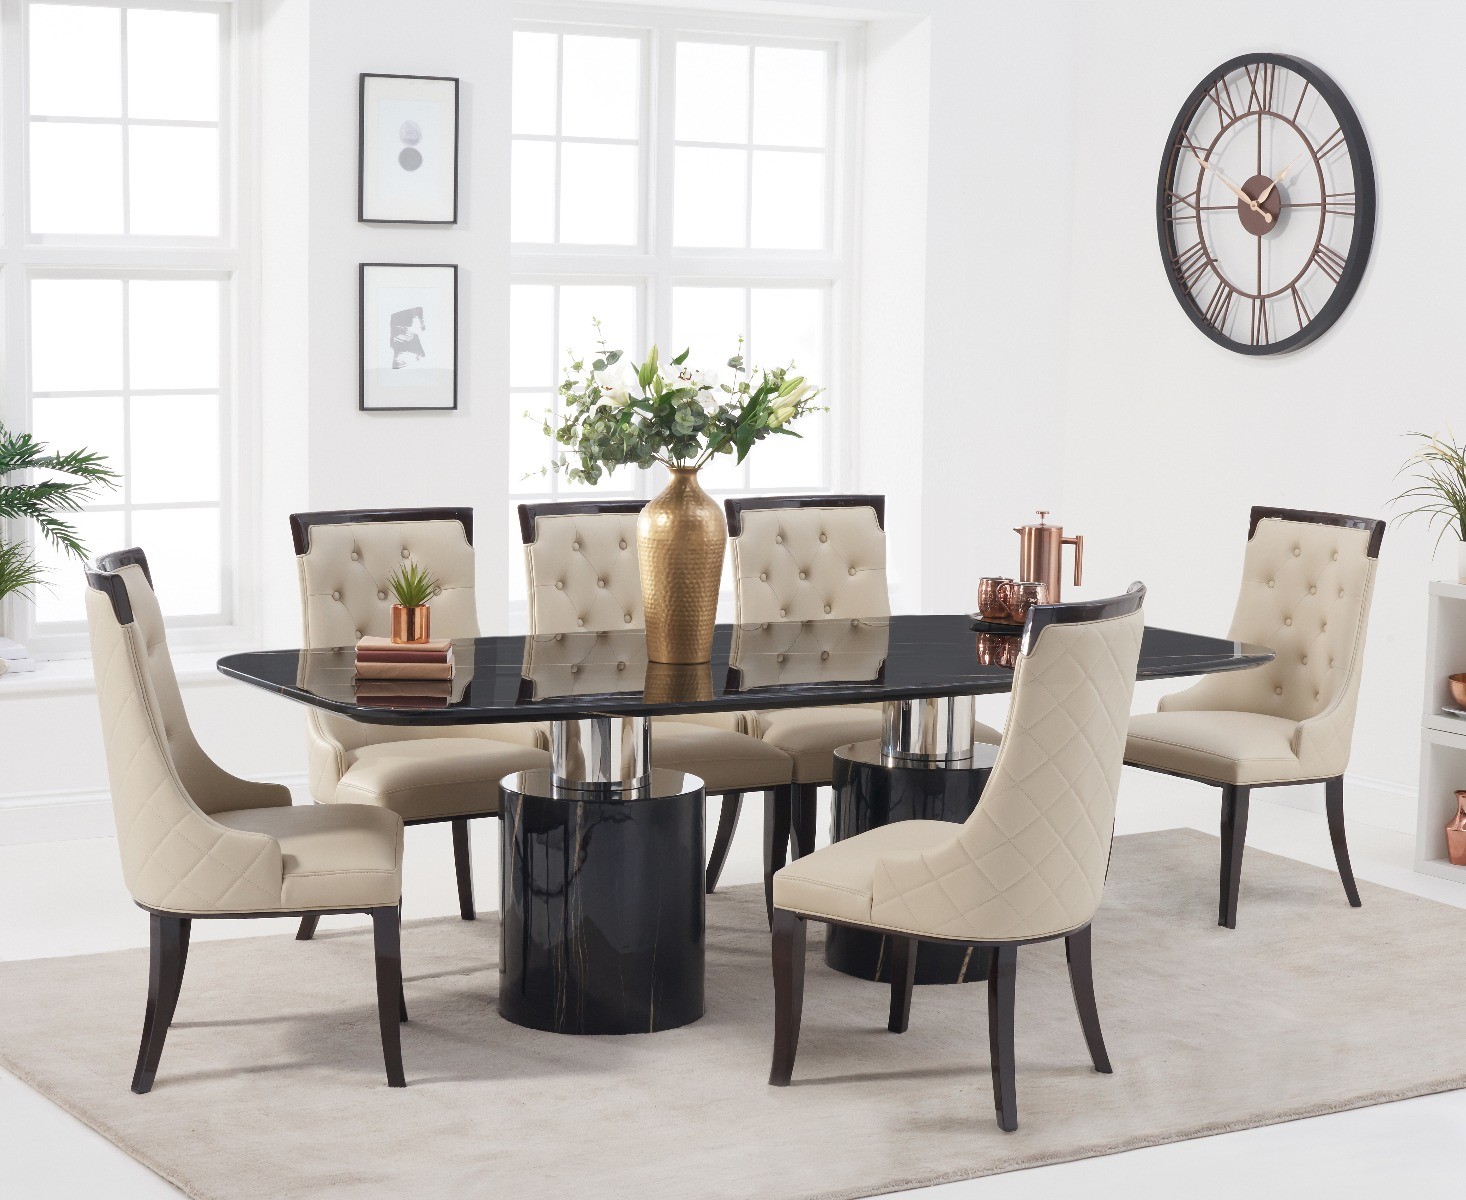 Antonio 180cm Black Marble Dining Table With 4 Cream Francesca Chairs